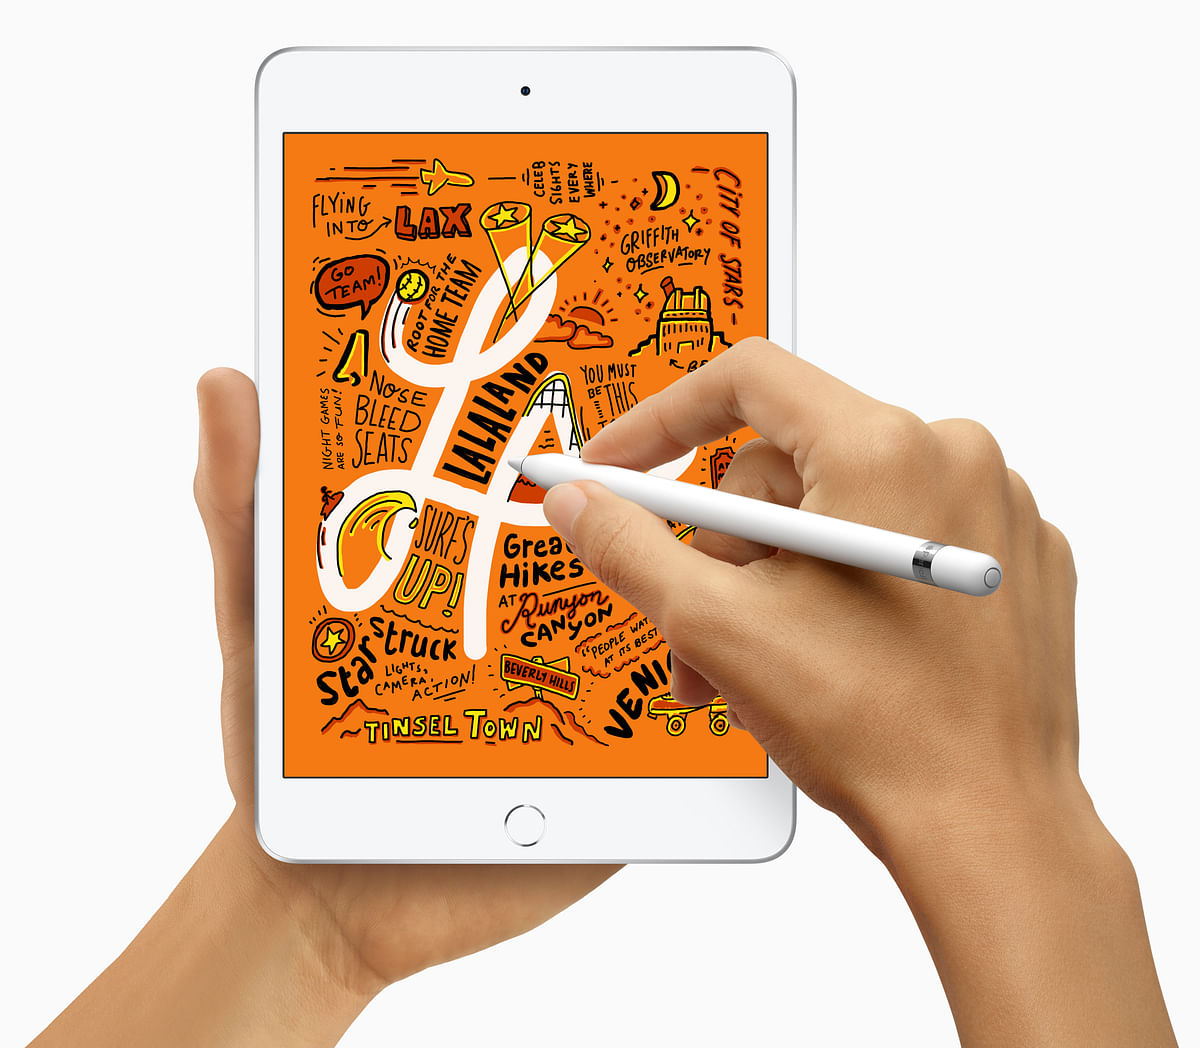 Both the new iPads are powered by Apple A12 bionic chip and support Apple pencil (first generation).